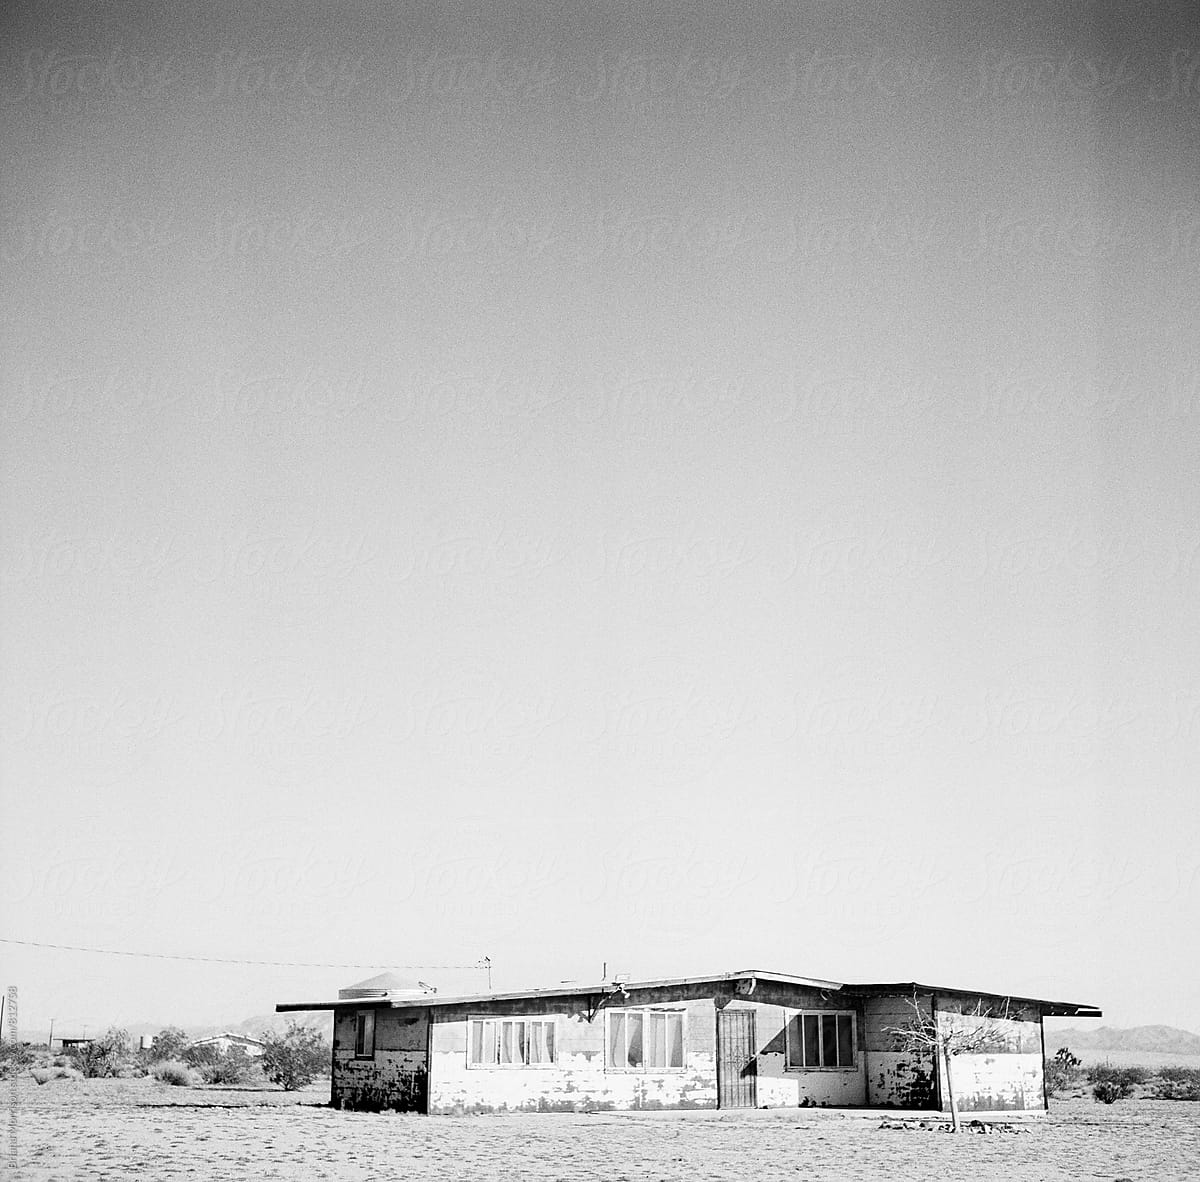 An Old Rundown House in the Desert in Black and White